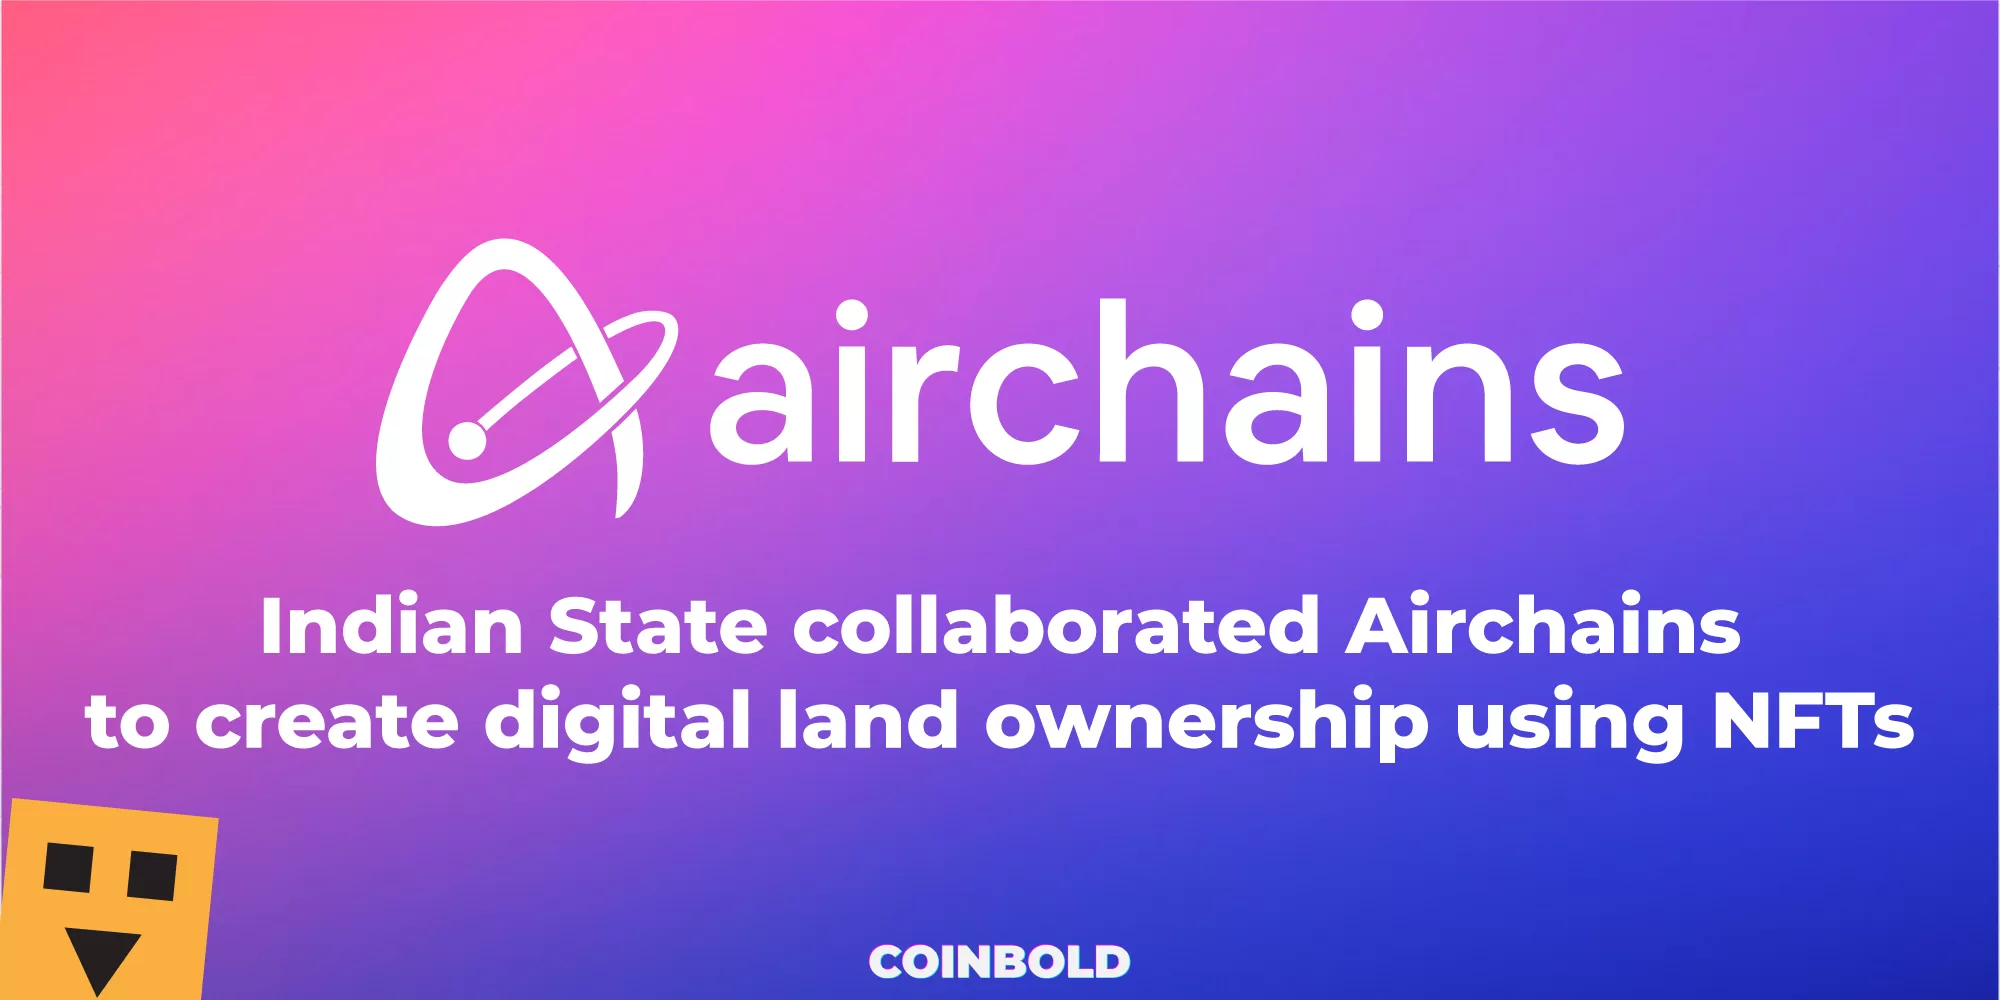 Indian State collaborated Airchains to create digital land ownership using NFTs